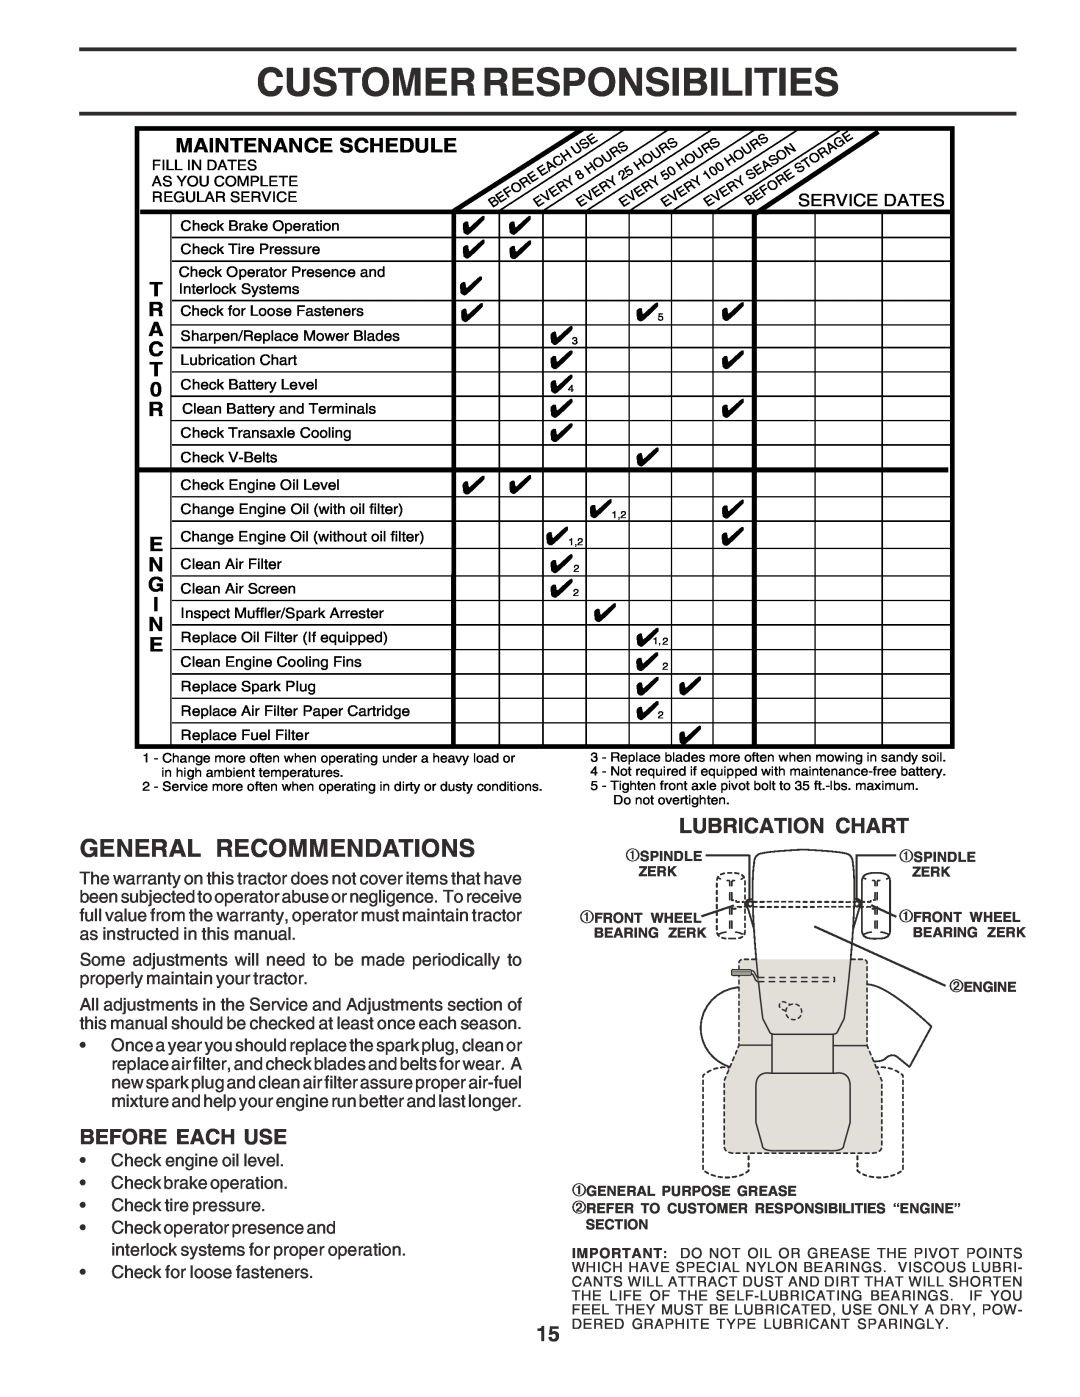 Poulan PR17H42STF owner manual Customer Responsibilities, General Recommendations, Lubrication Chart, Before Each Use 